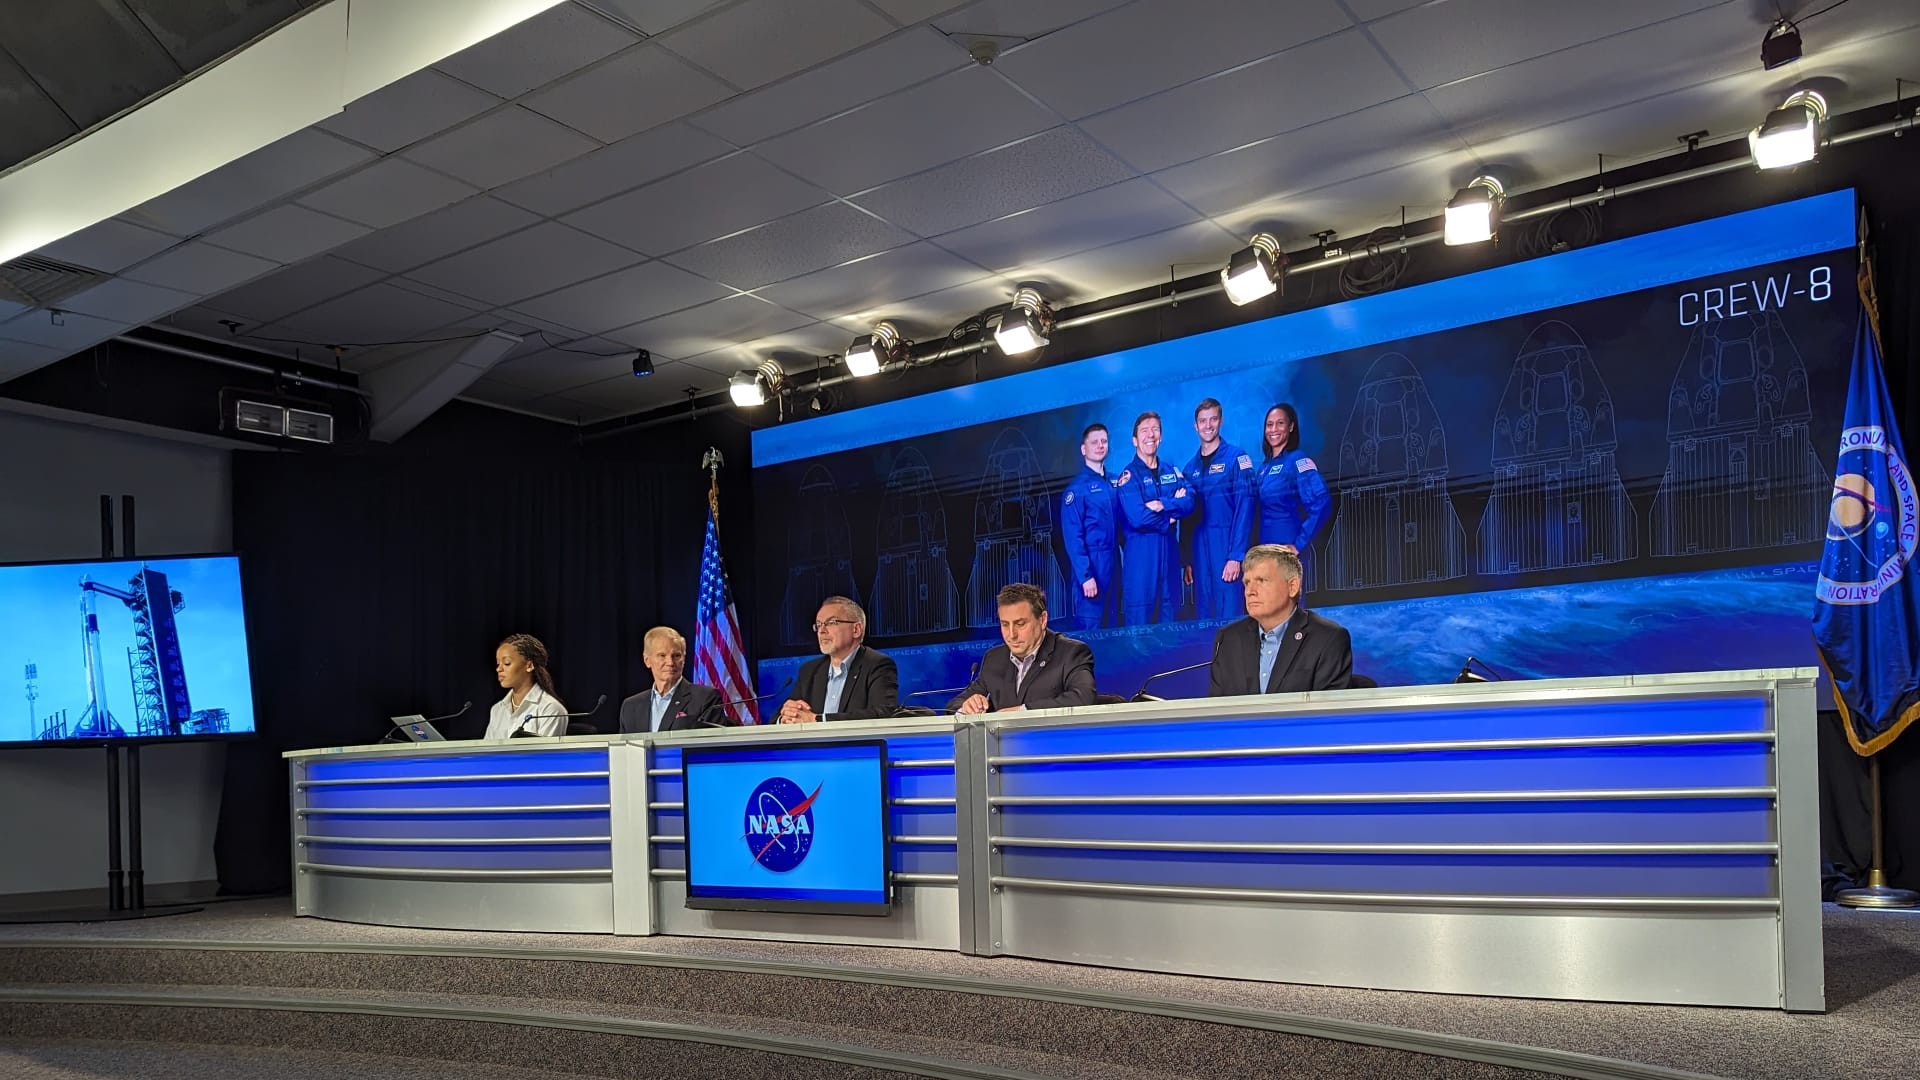 ‘It’s white-knuckle time:’ NASA chief stresses safety for Crew-8 astronaut launch Space